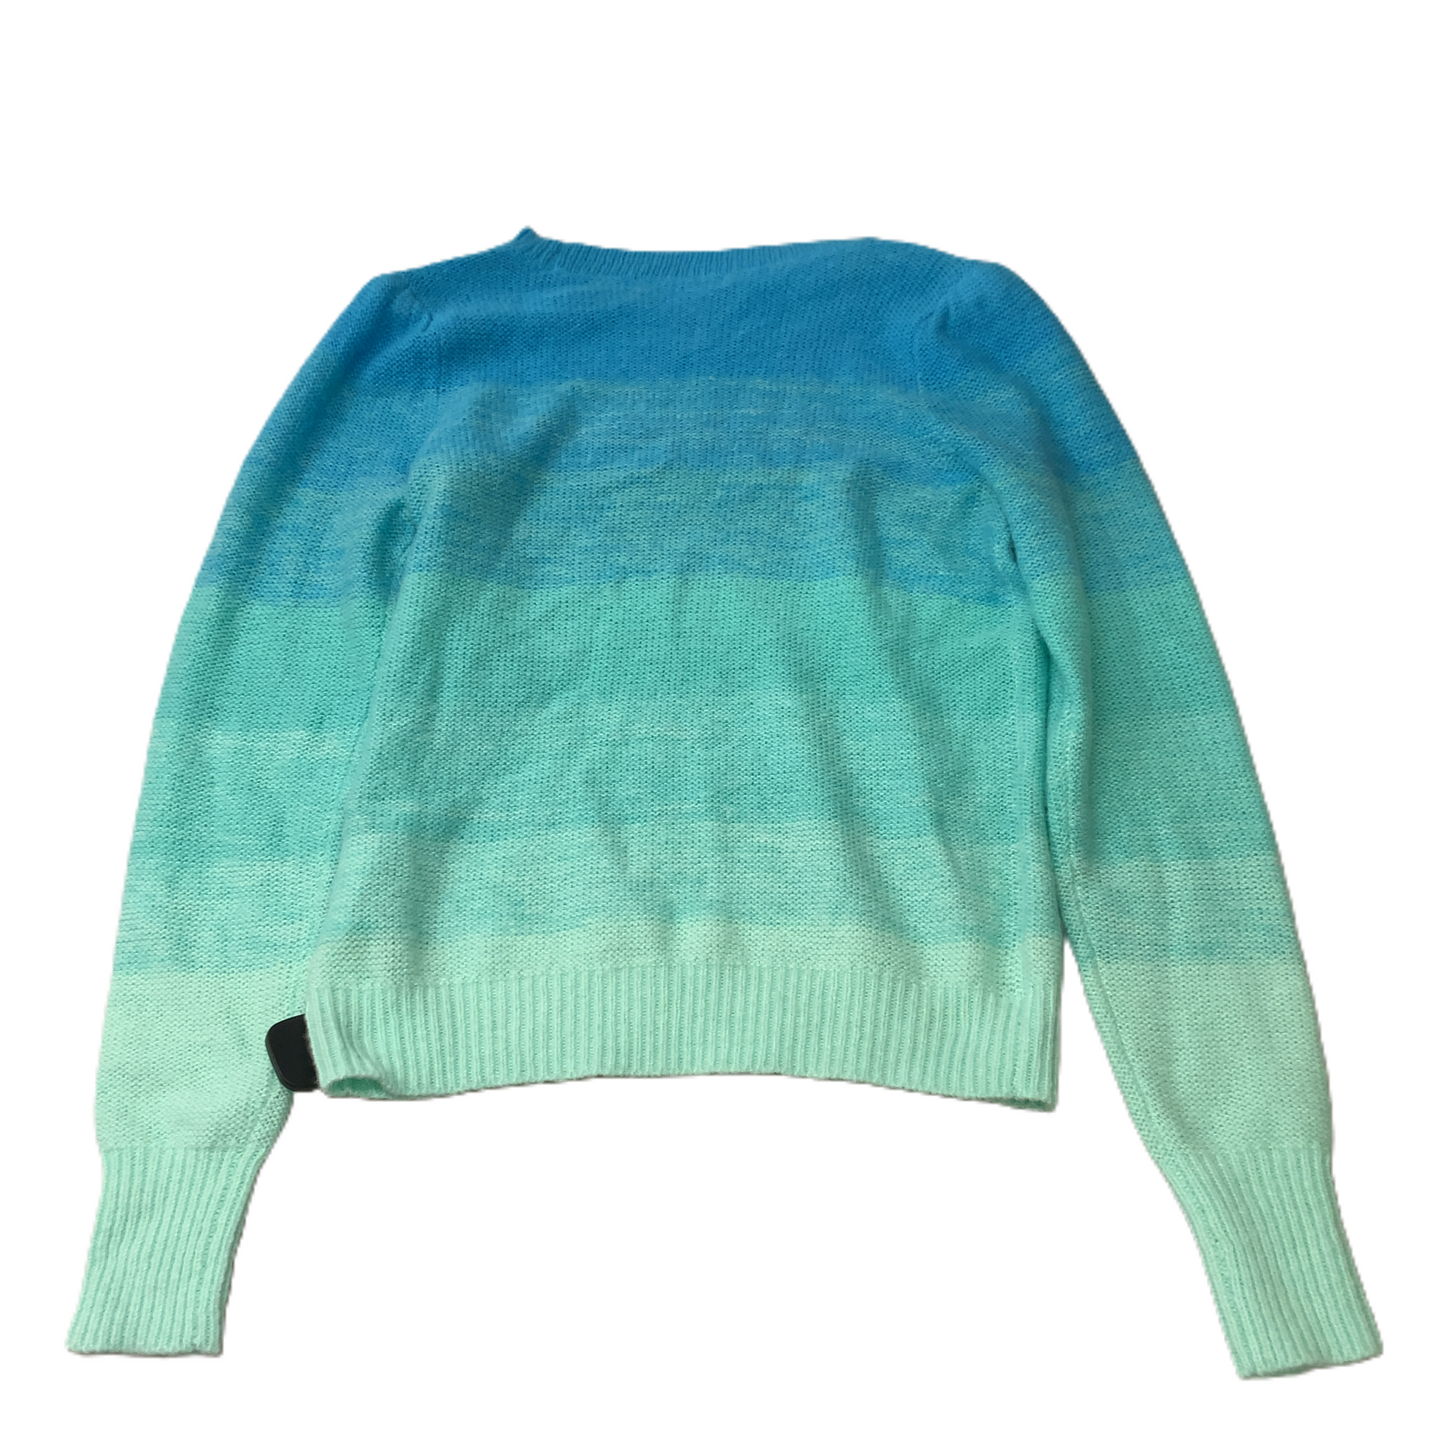 Blue  Sweater Designer By Lilly Pulitzer  Size: S